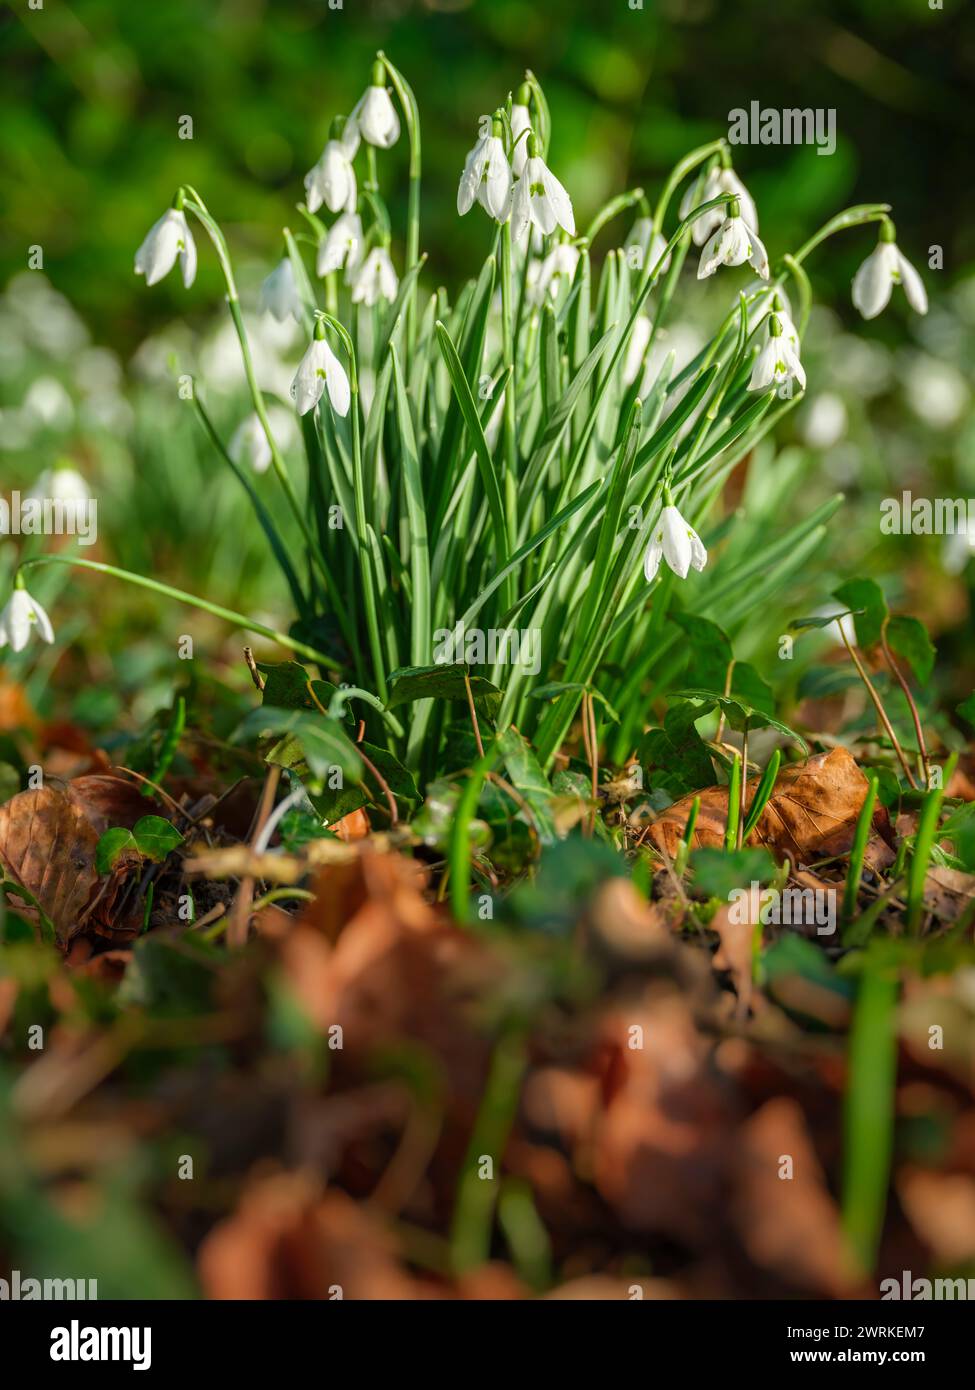 Woodland Snowdrops glow in the February sunshine. Snowdrops are hardy herbaceous plants that perennate by underground bulbs. They are among the earlie Stock Photo